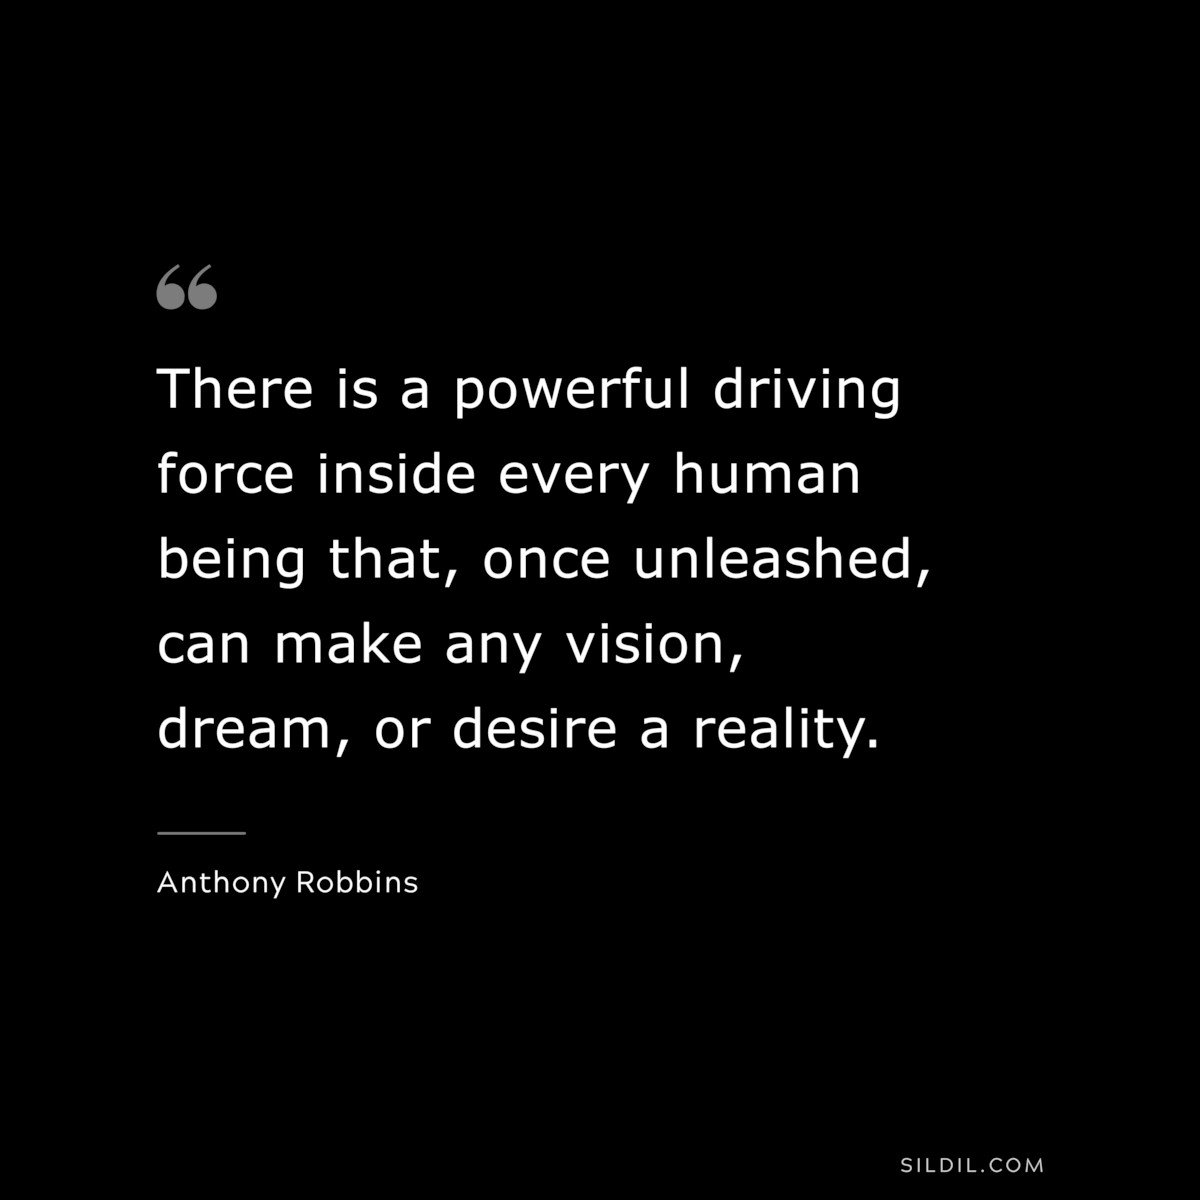 There is a powerful driving force inside every human being that, once unleashed, can make any vision, dream, or desire a reality. ― Anthony Robbins